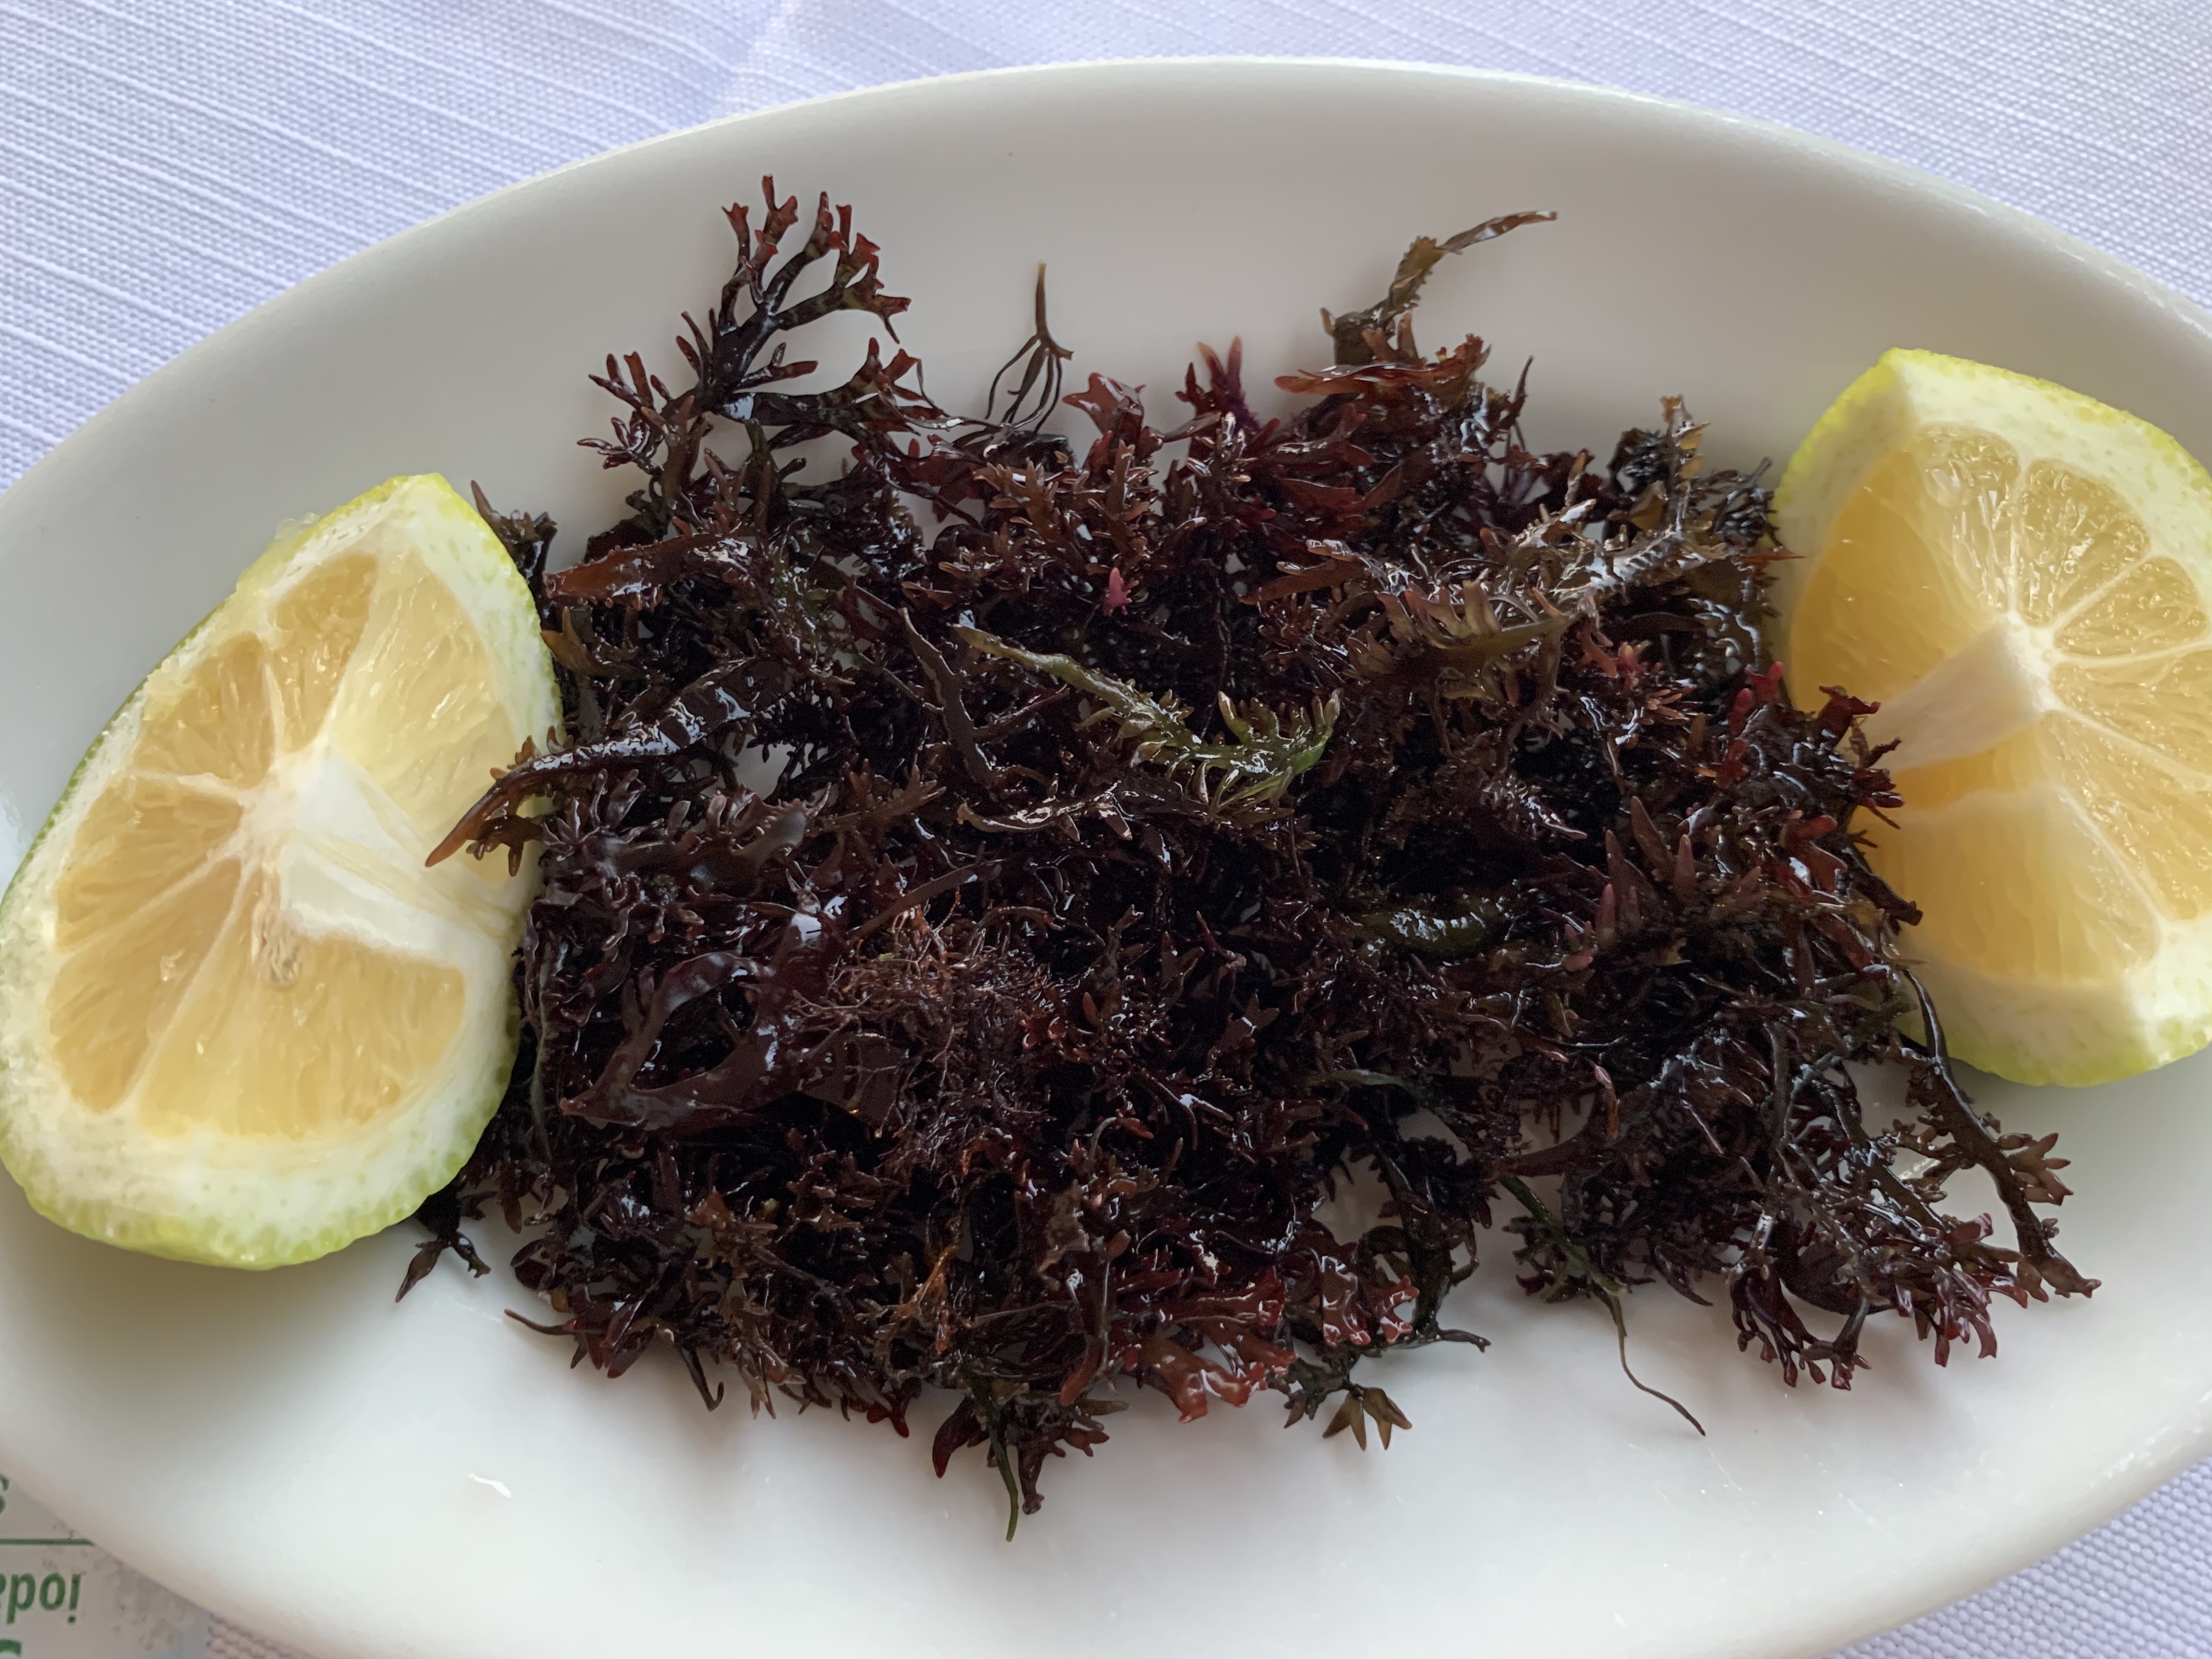 Mauru, Catania, Sicily – red curly saeaweed served on a white oval plate with two lemon slices.